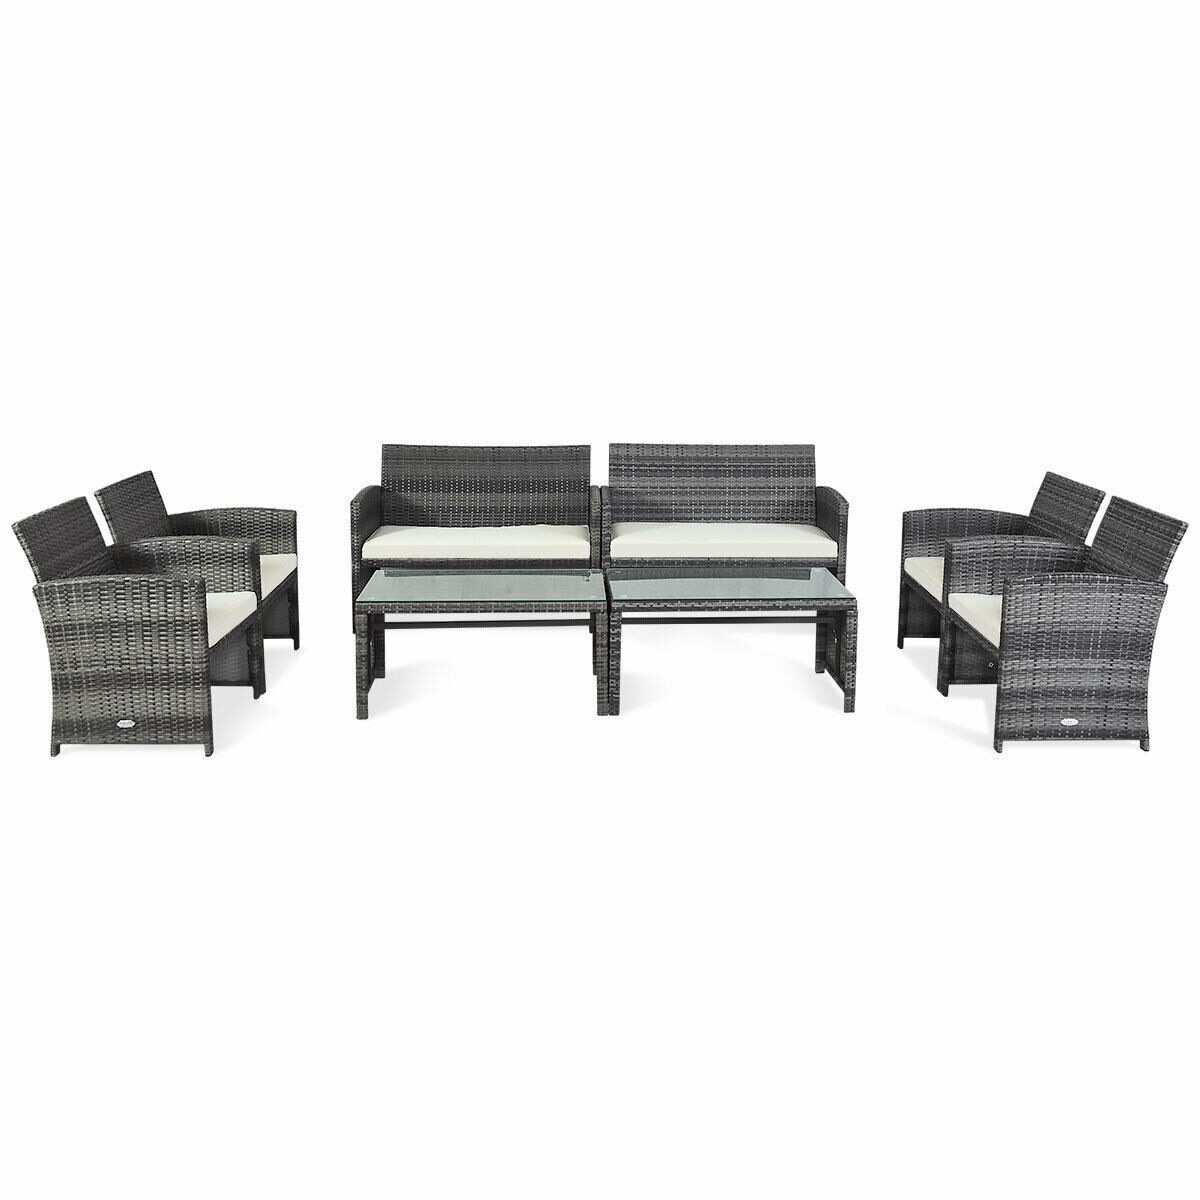 Gymax 8PCS Patio Outdoor Rattan Furniture Set w/ Cushioned Chair Loveseat Table - image 1 of 10